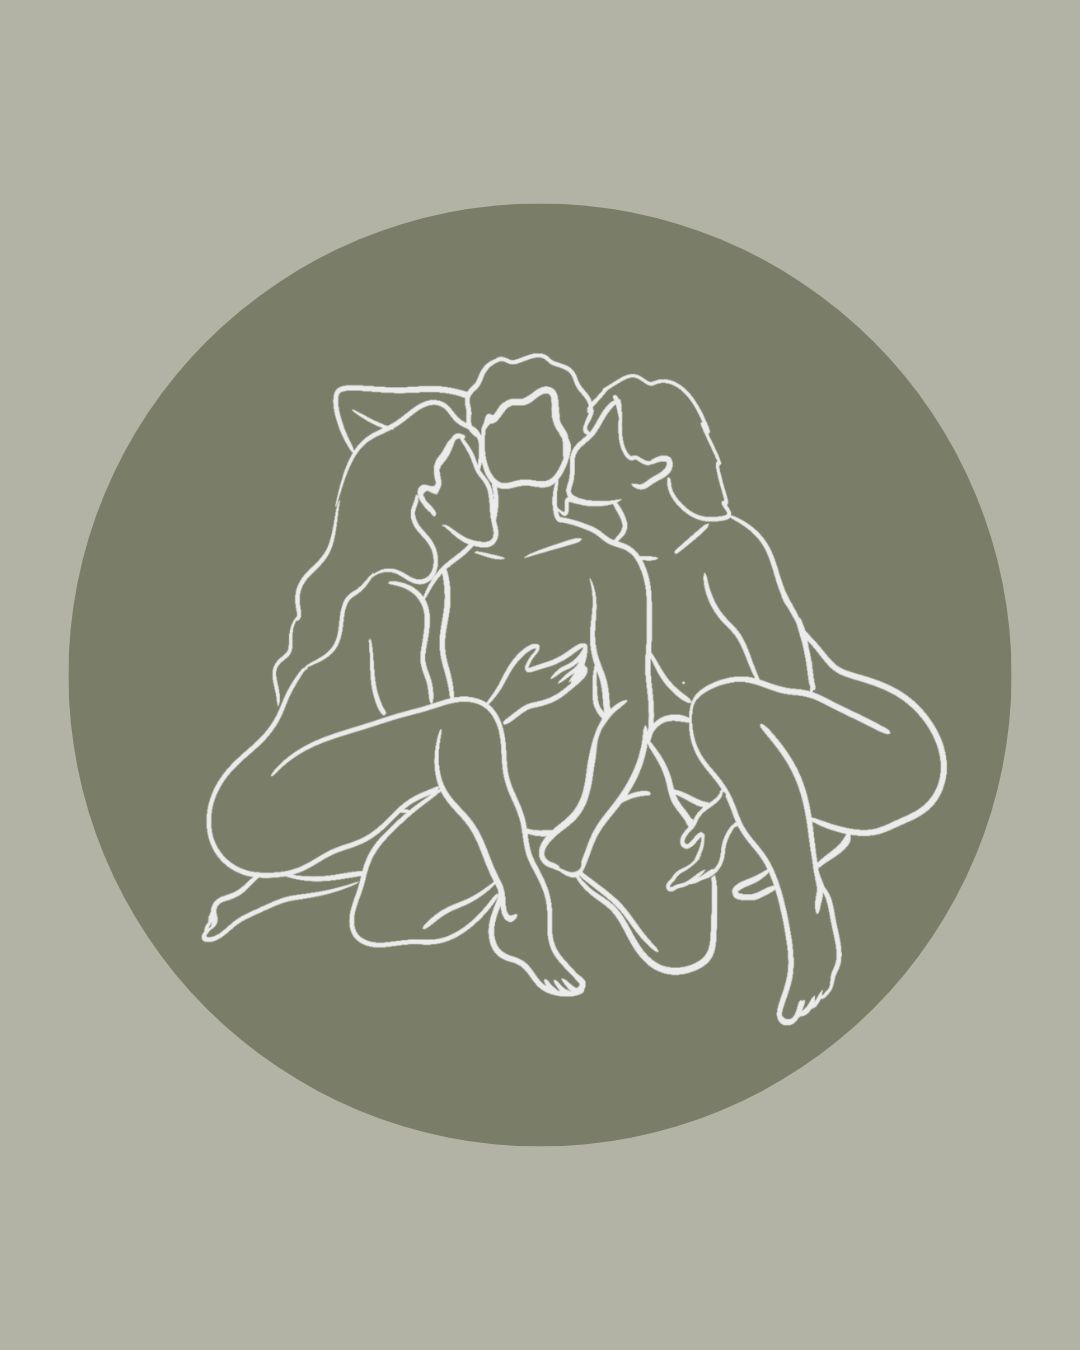 Illustration of the three-play, threesome sex position